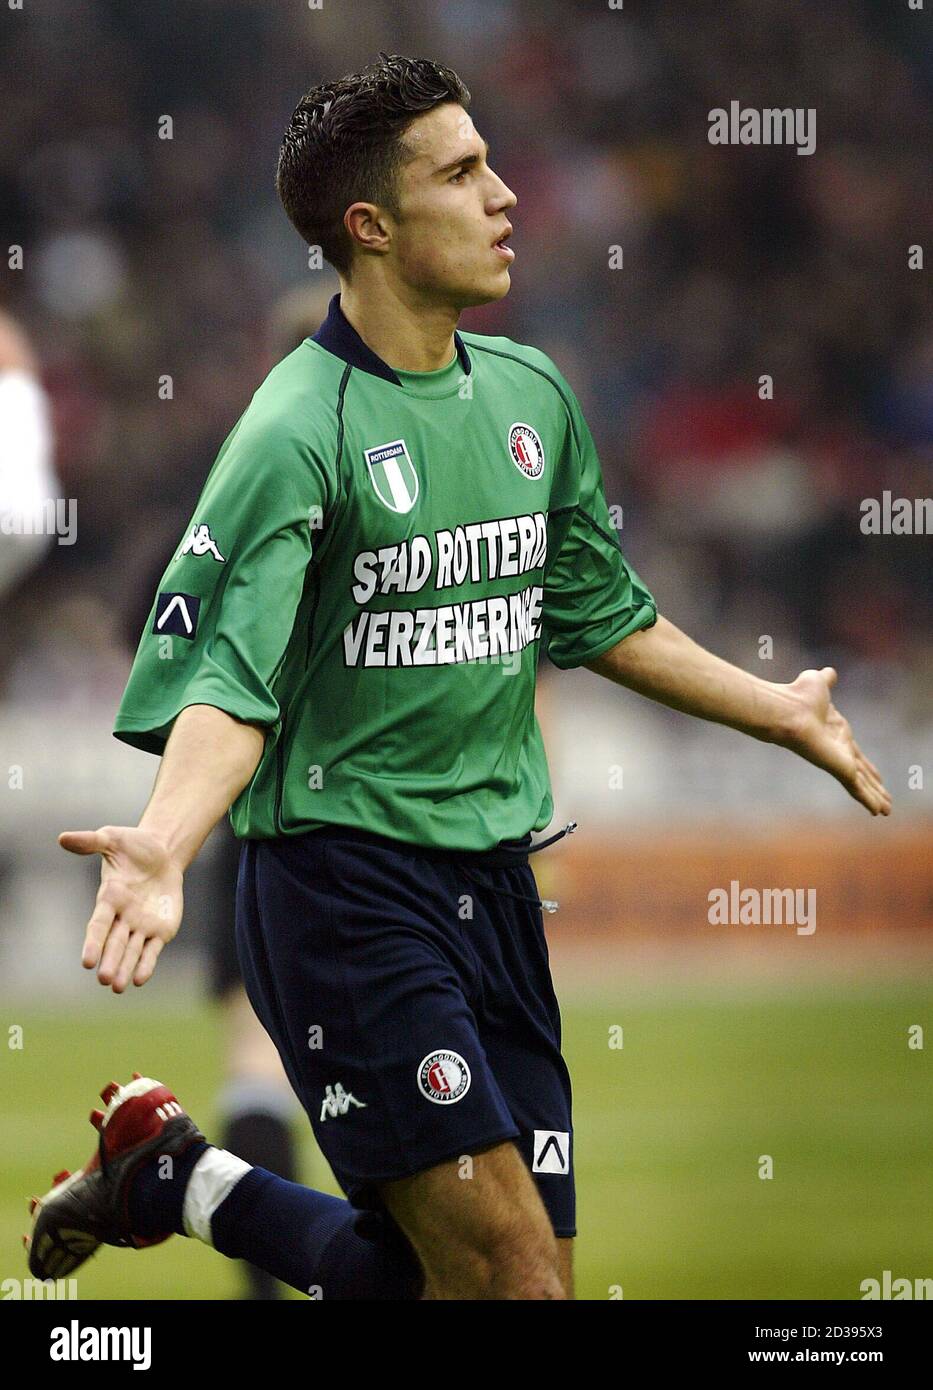 A file photograph shot on February 9,2003 shows Feyenoord's Robin van  Persie, who has signed a four year contract with Arsenal, it was announced  April 28, 2004. The Dutch under-21 international will